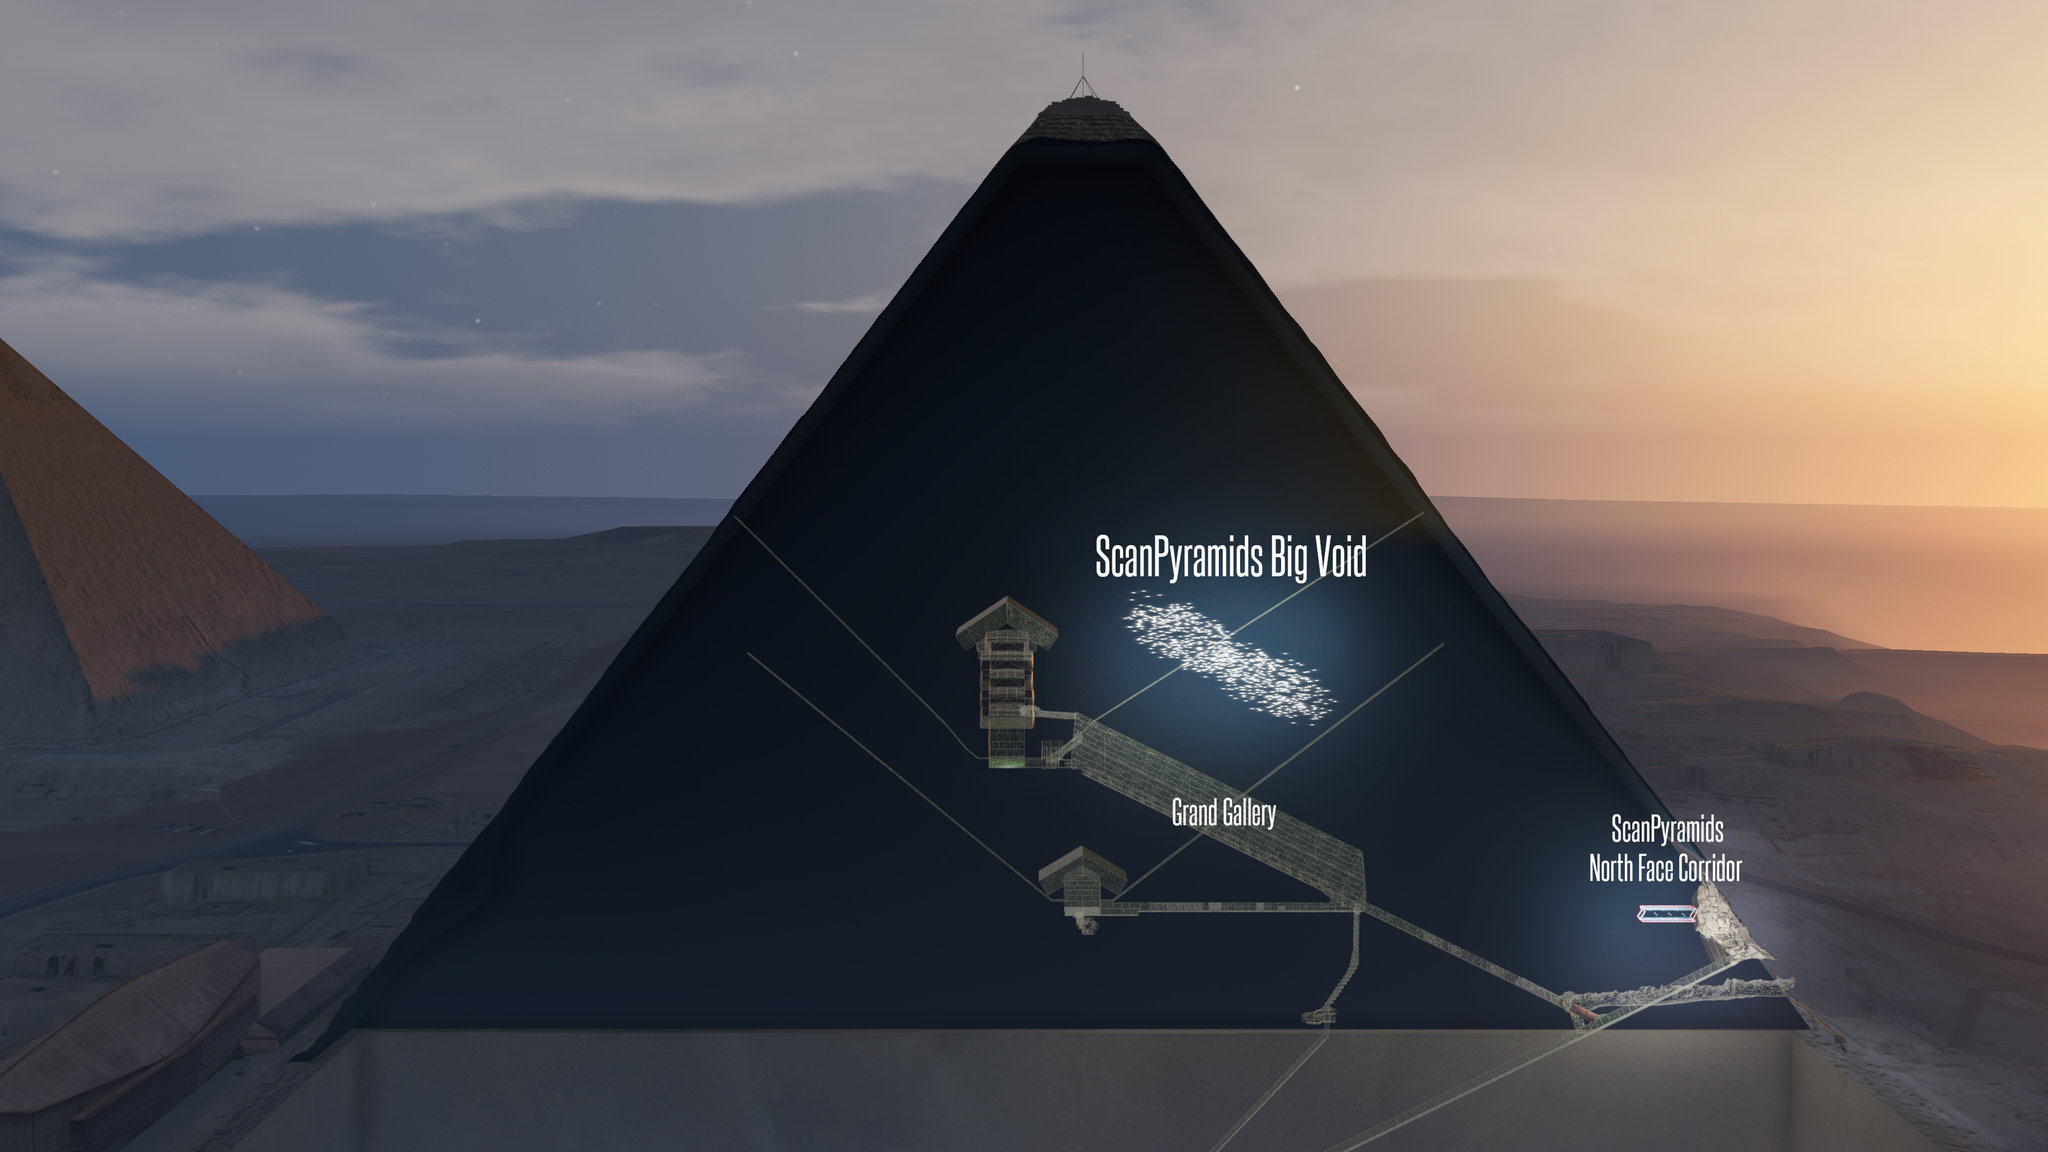 Scientists Discover Massive 'Void' in the Great Pyramid at Giza